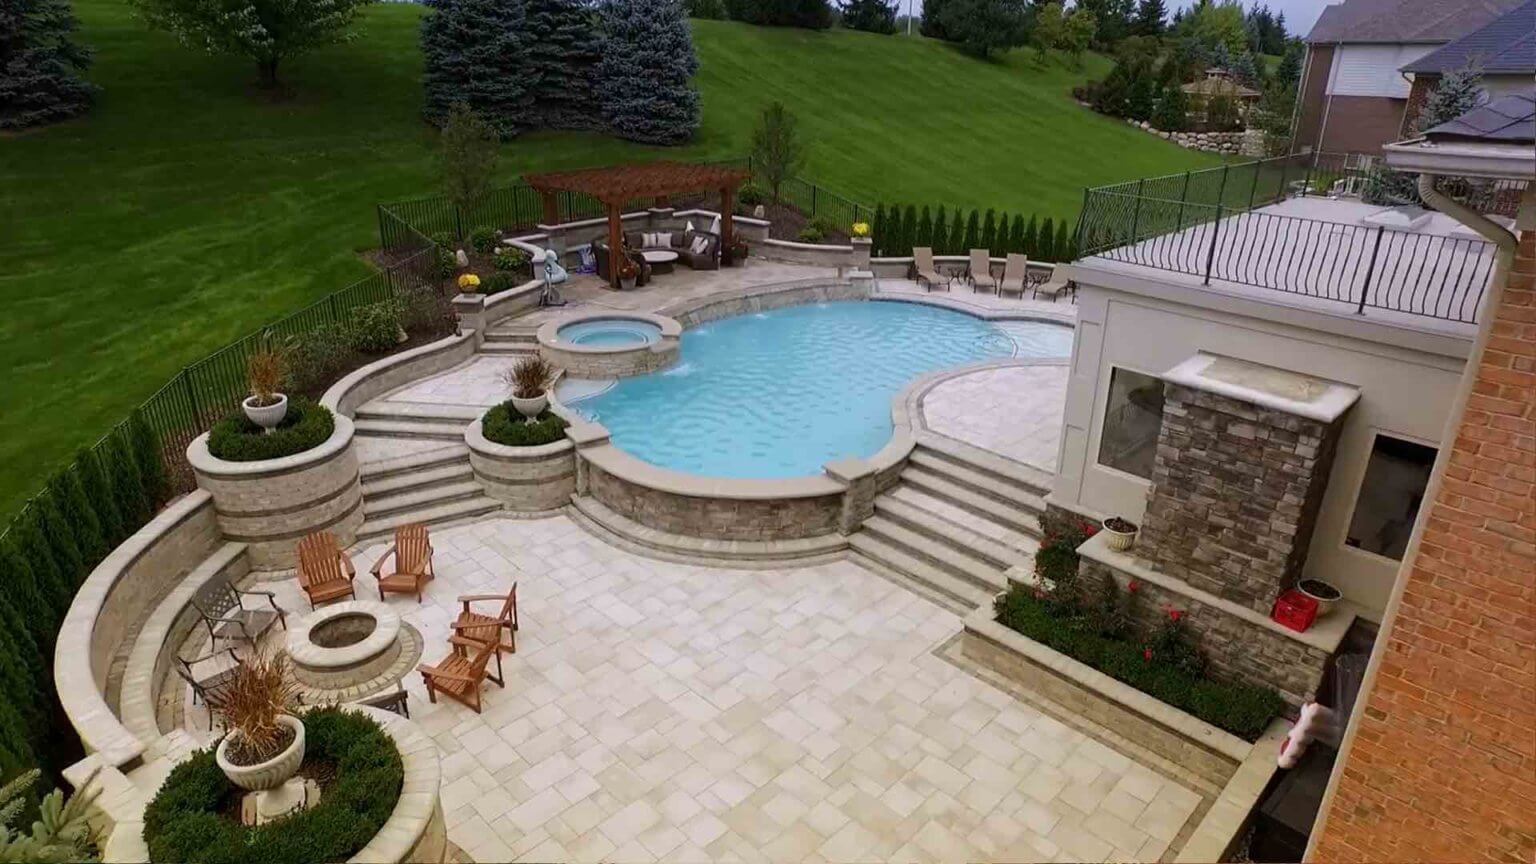 view of backyard patio, fire pit, seating, pool and spillover spa